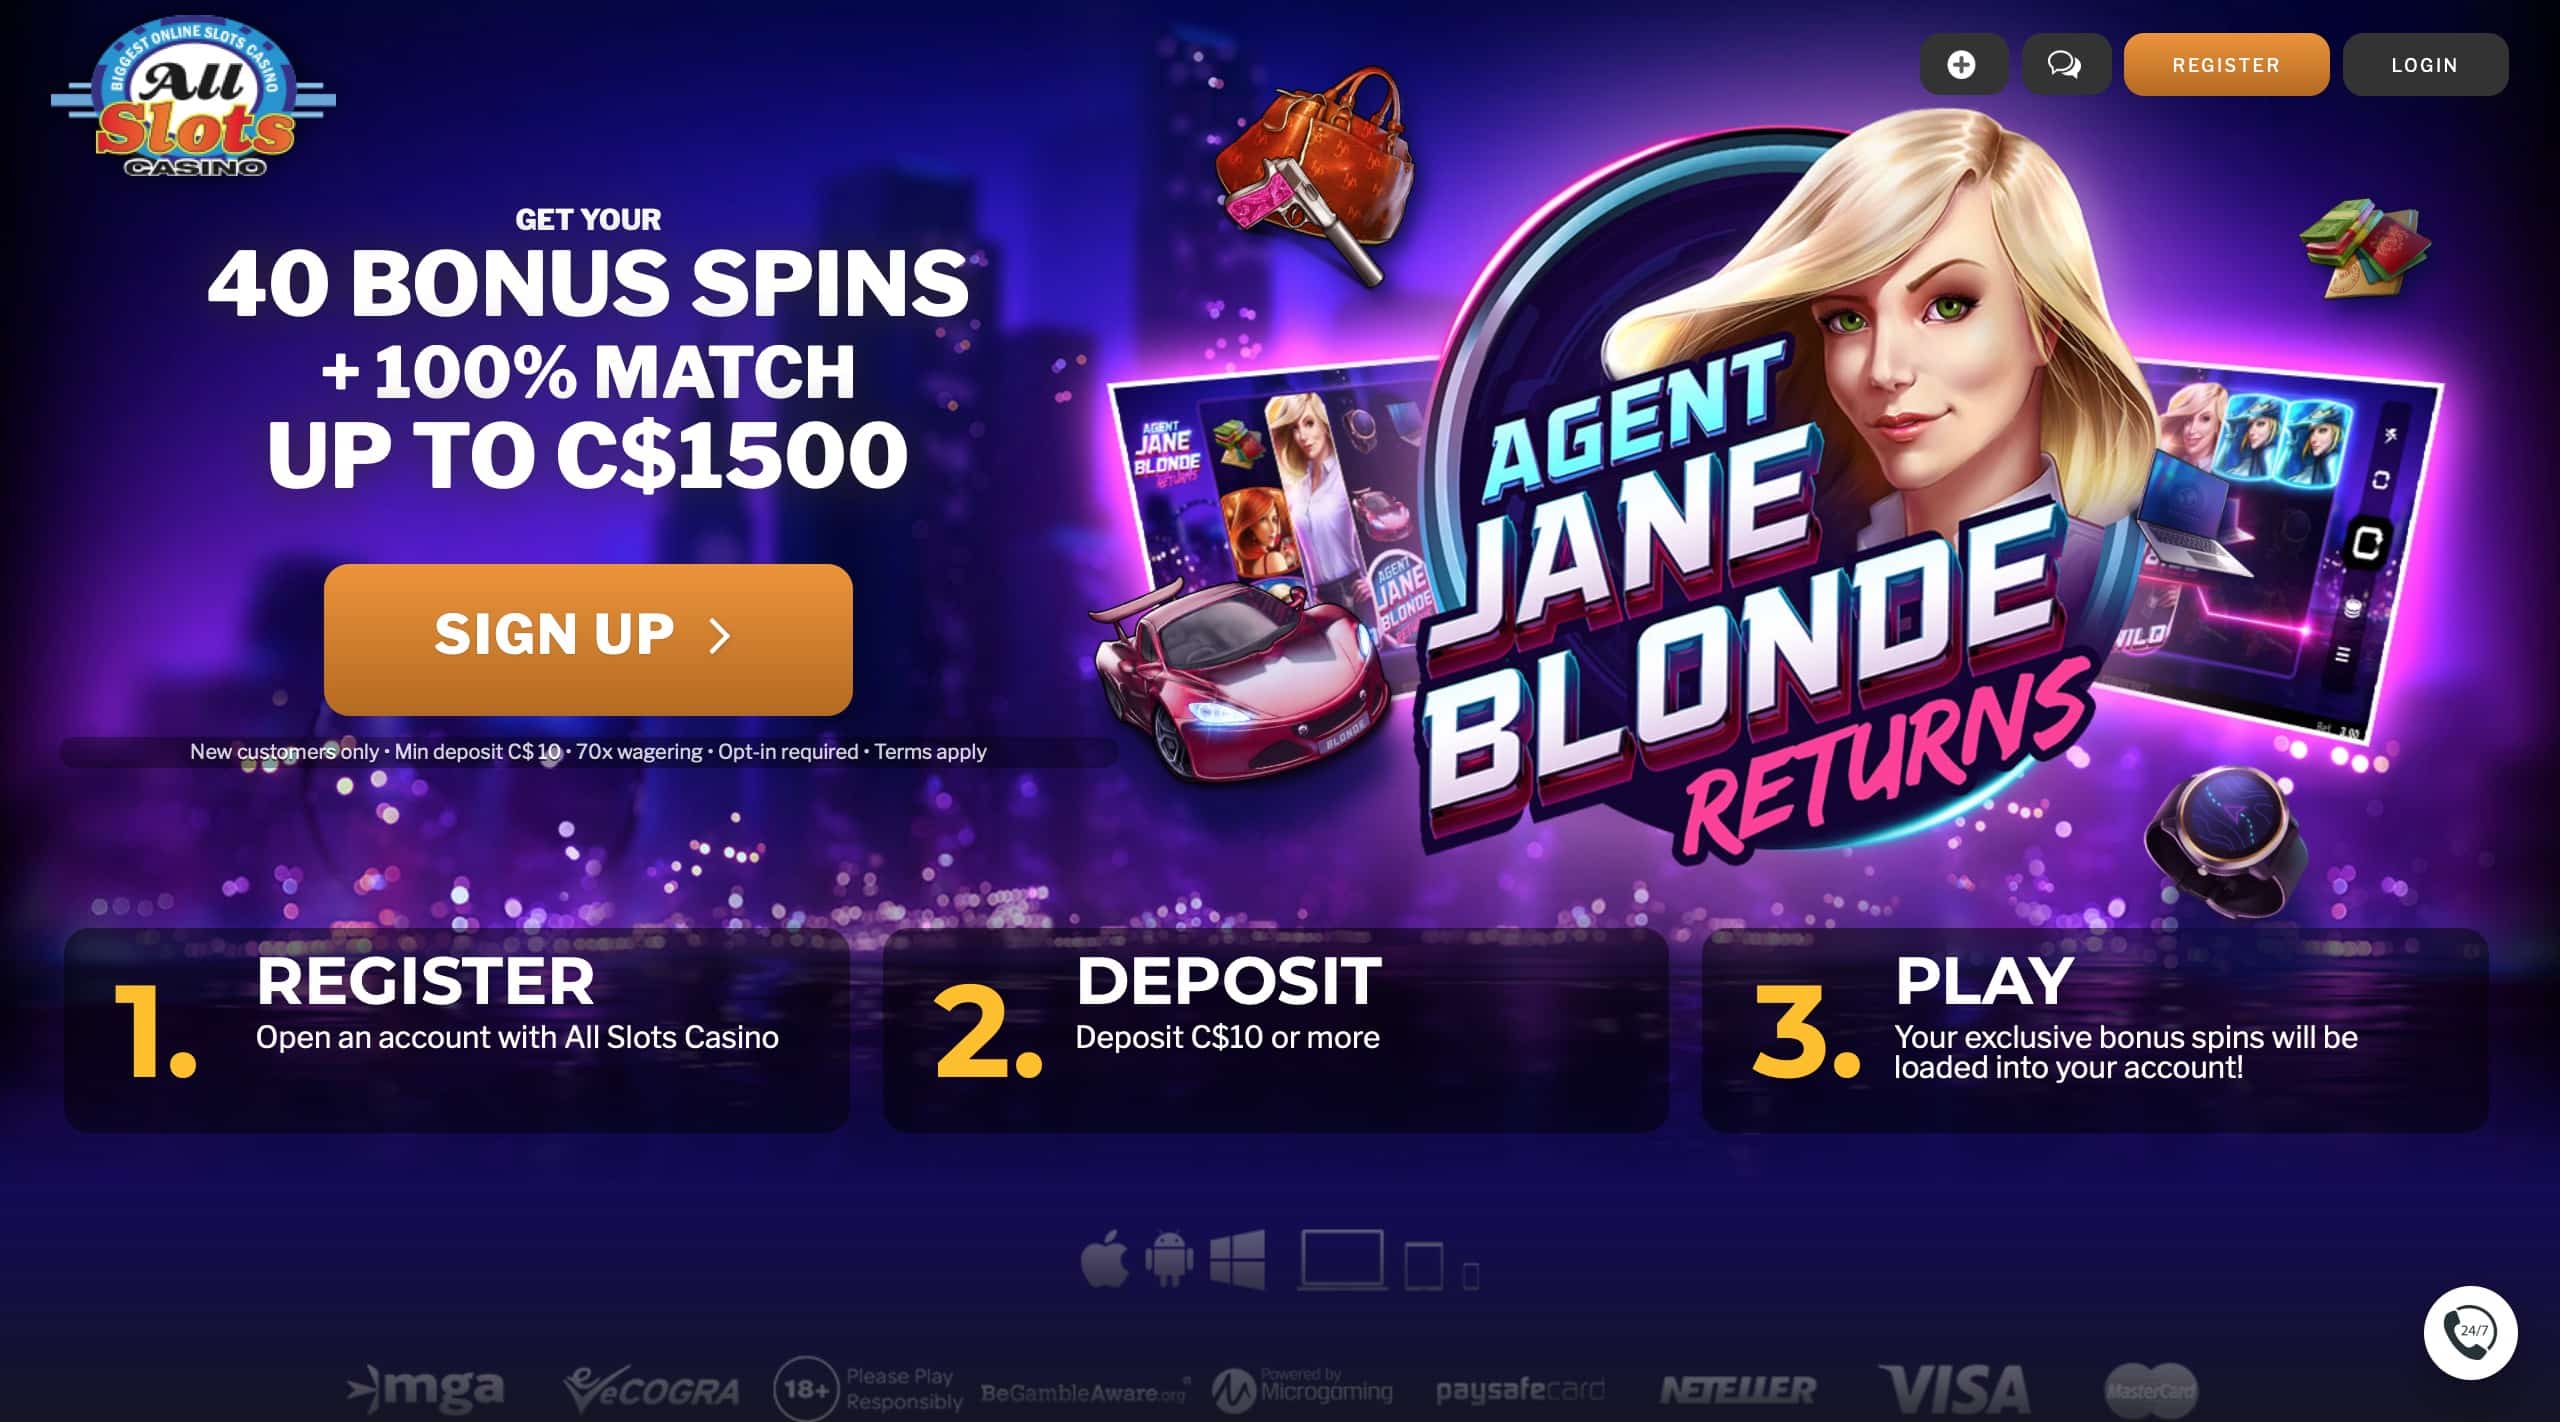 A Comparison of All Slots Casino's Slot Games to Other Online Casinos